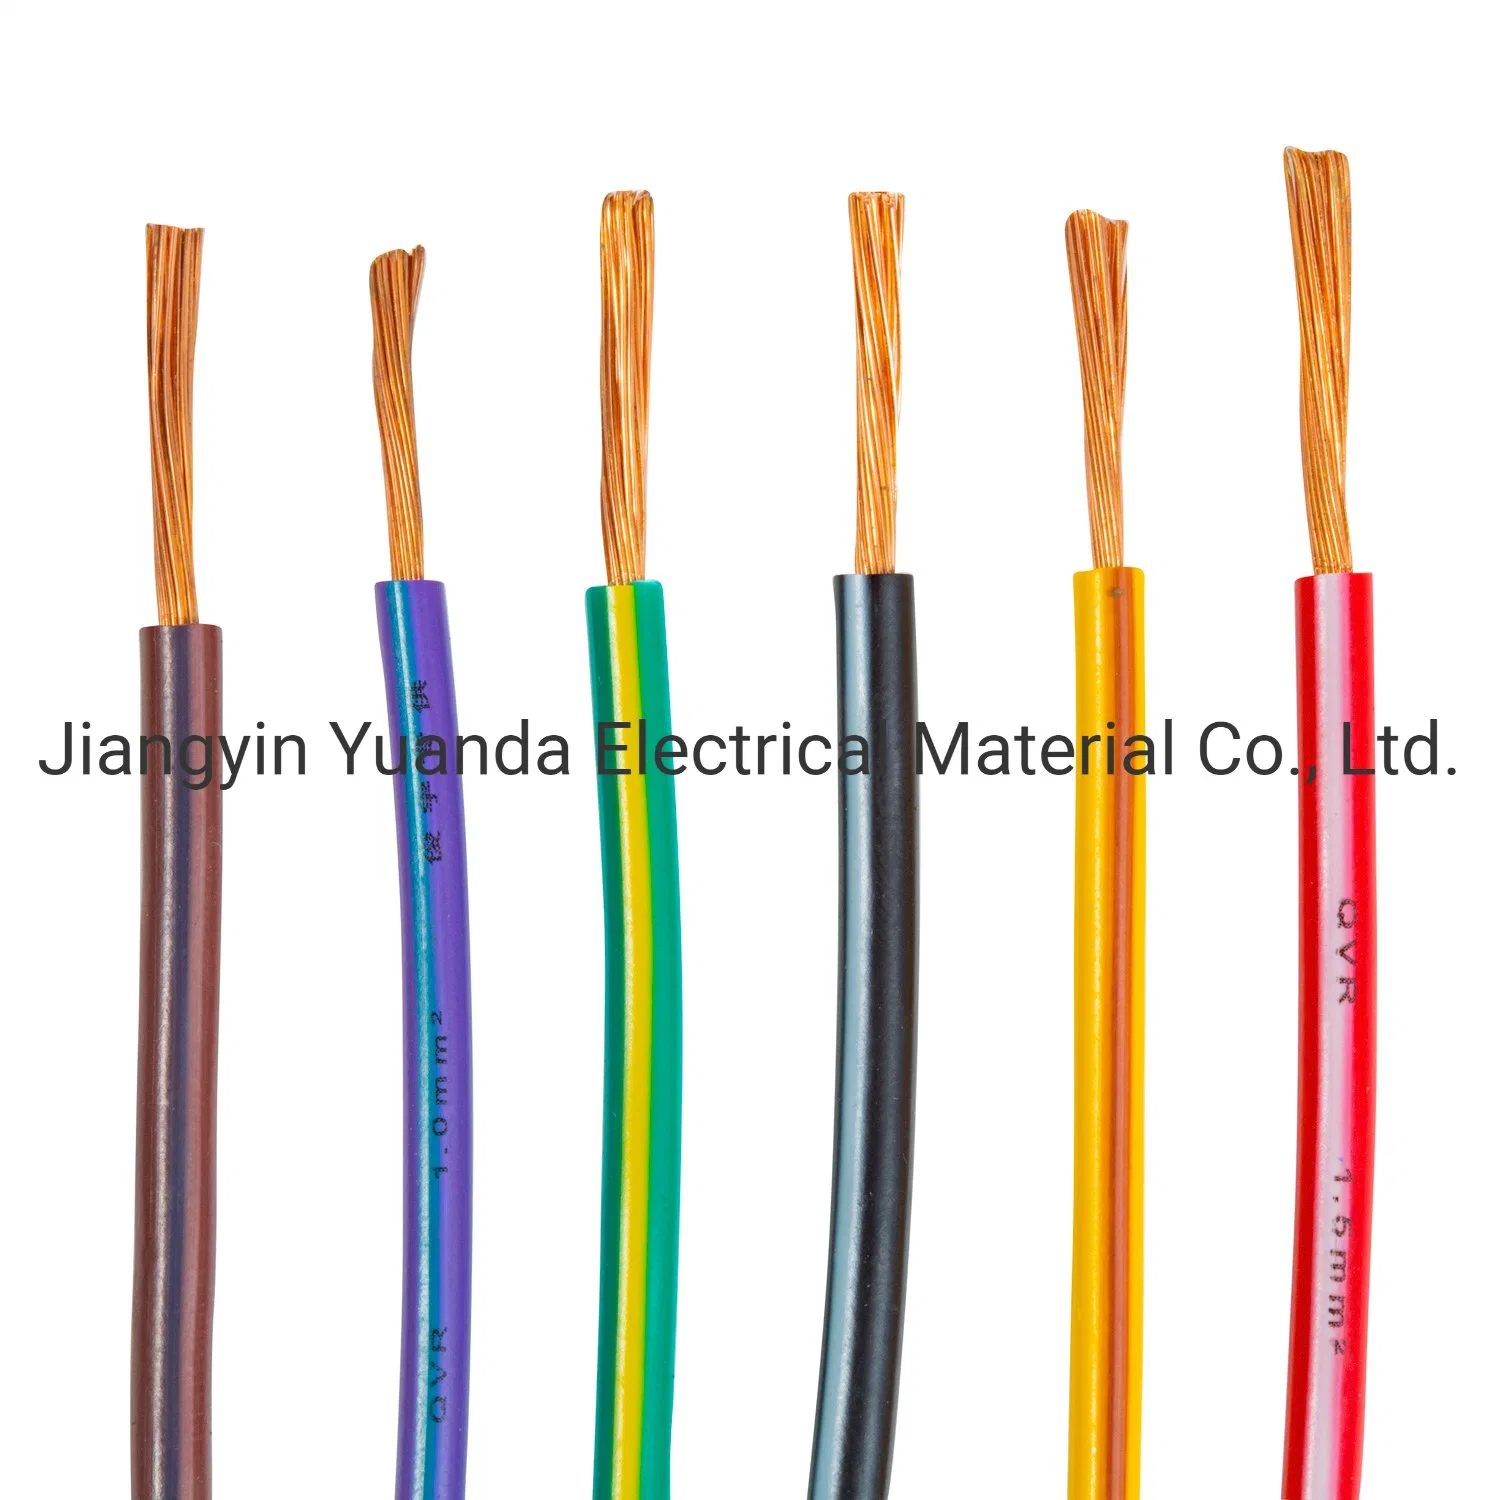 Hts Low-Voltage Basic Cable for Automotive Electrical System